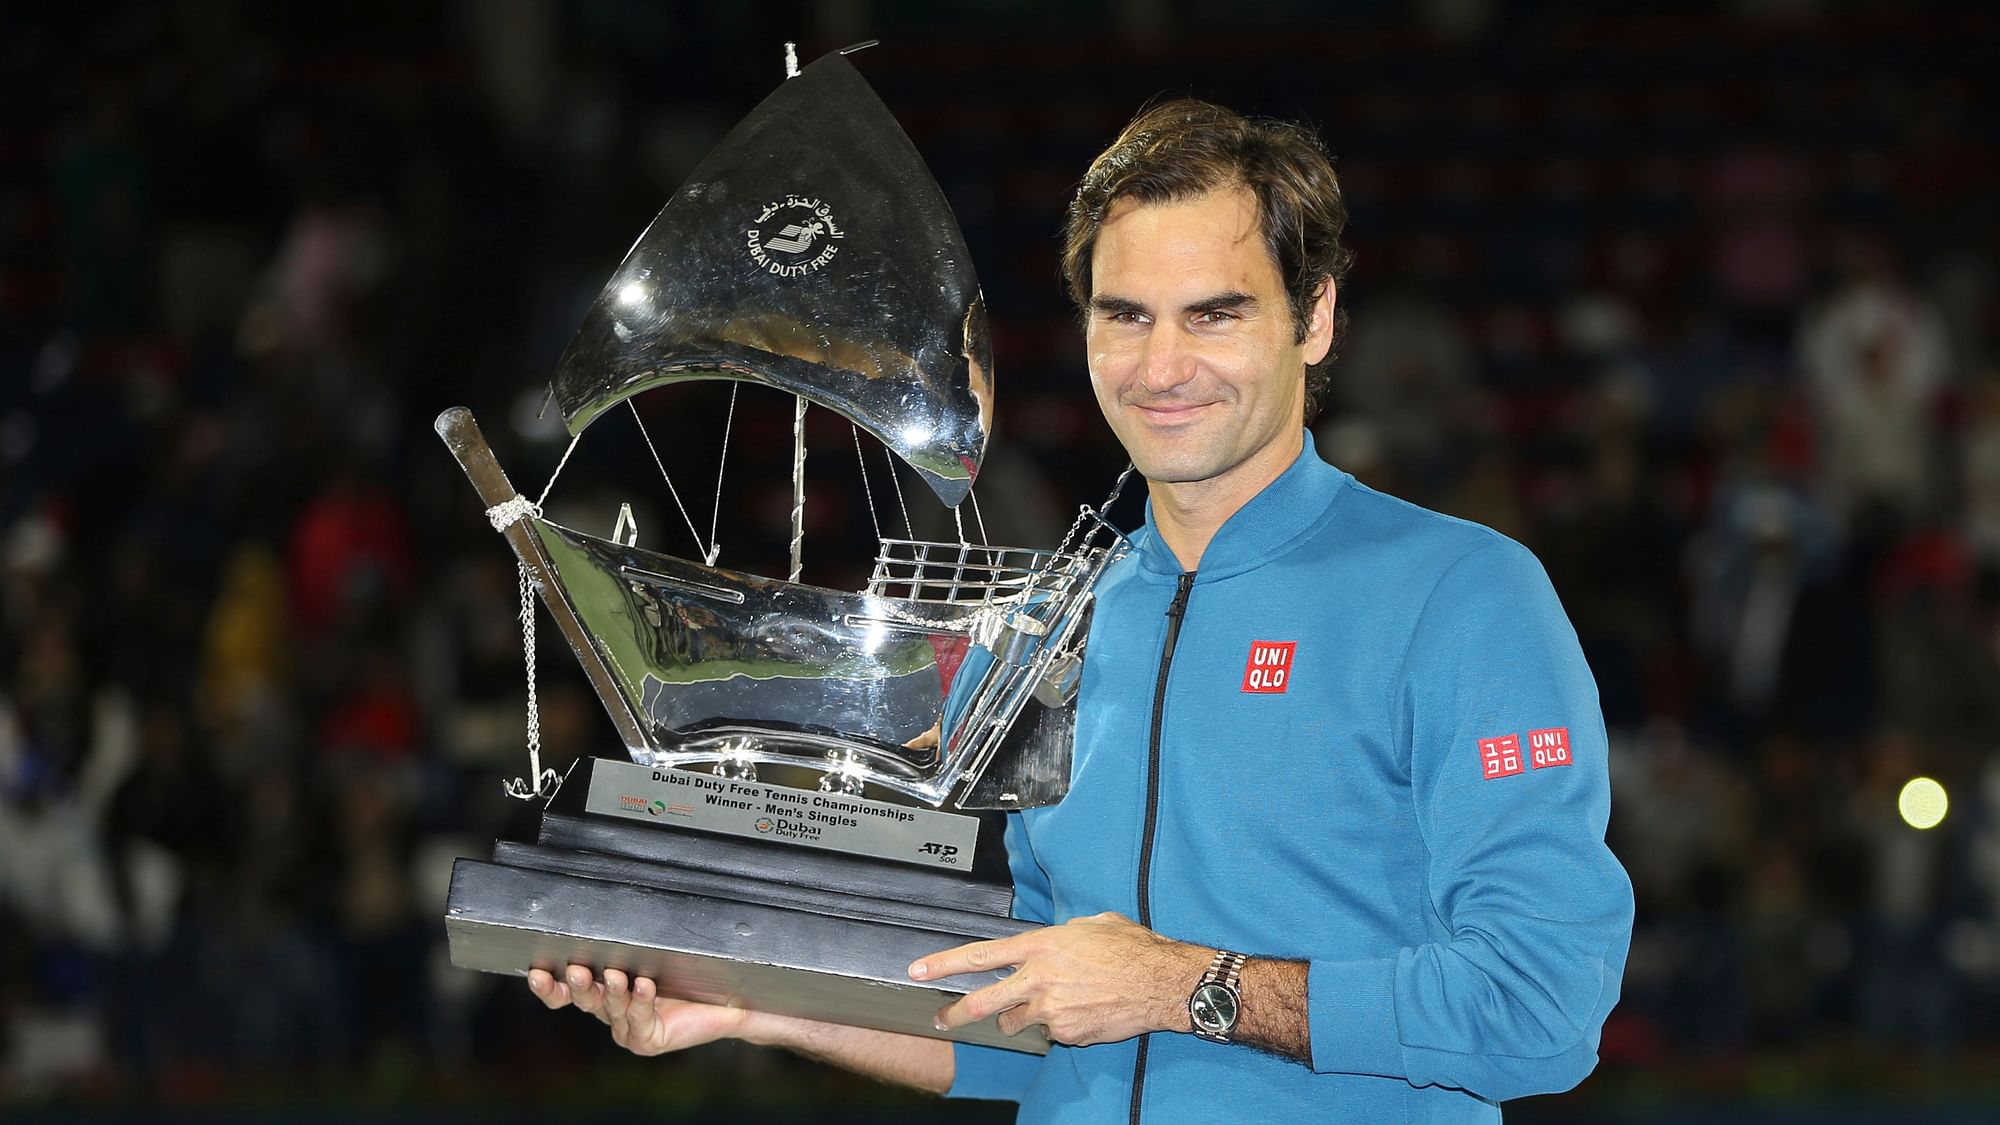 Roger Federer of Switzerland holds his trophy after winning the final match at the Dubai Duty Free Tennis Championship against Stefanos Tsitsipas of Greece in Dubai, on Saturday.